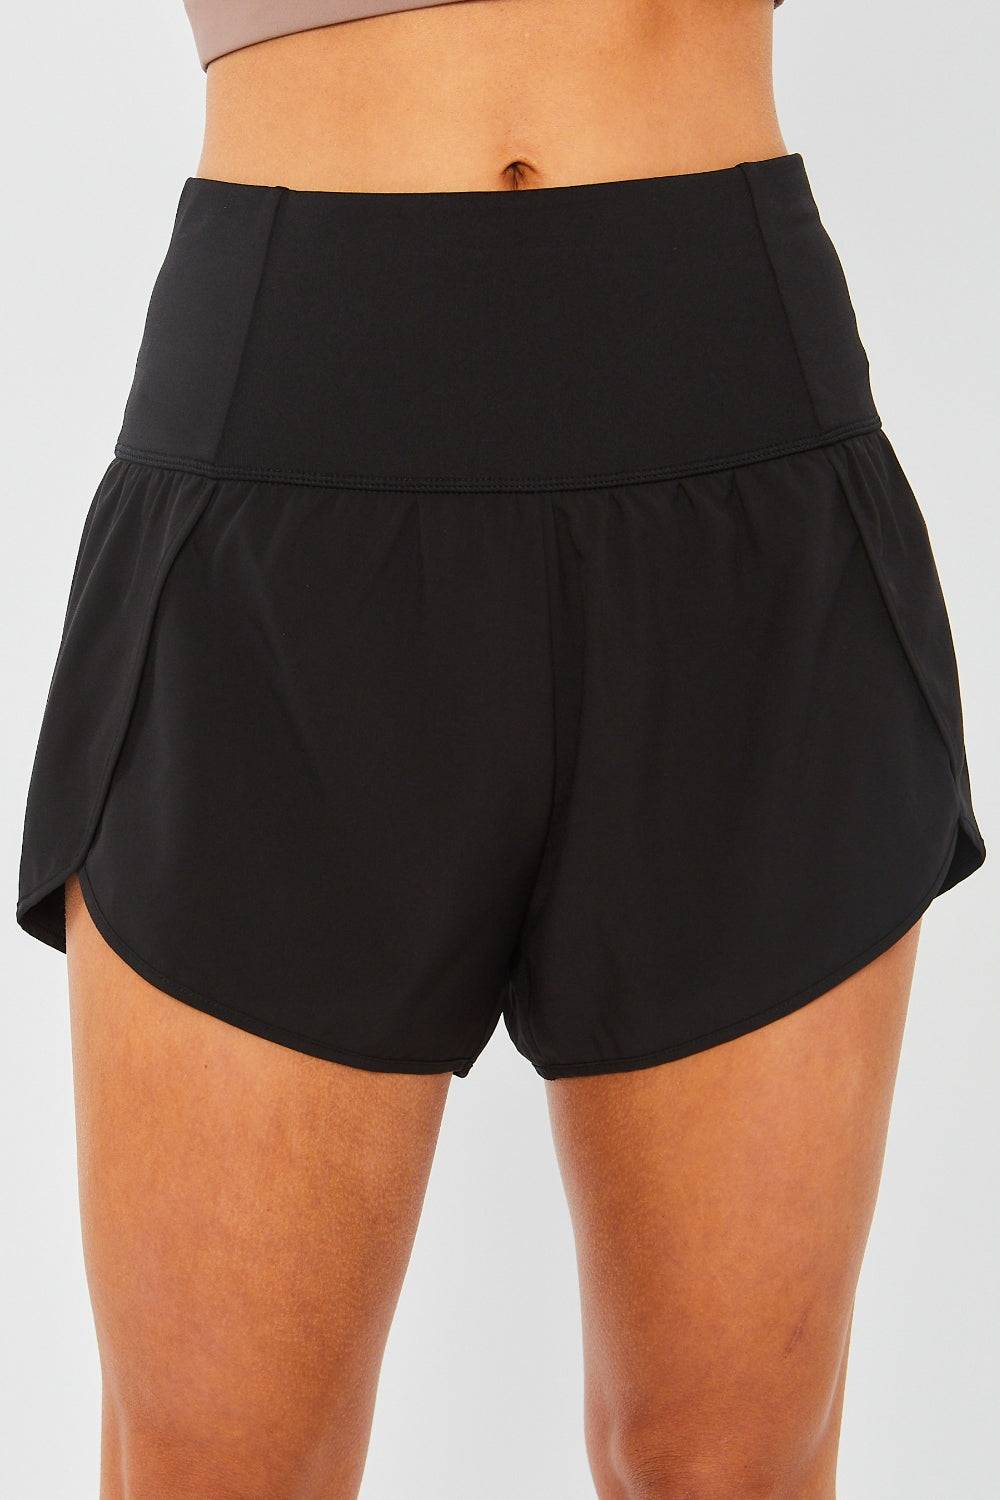 a close up of a woman's black shorts